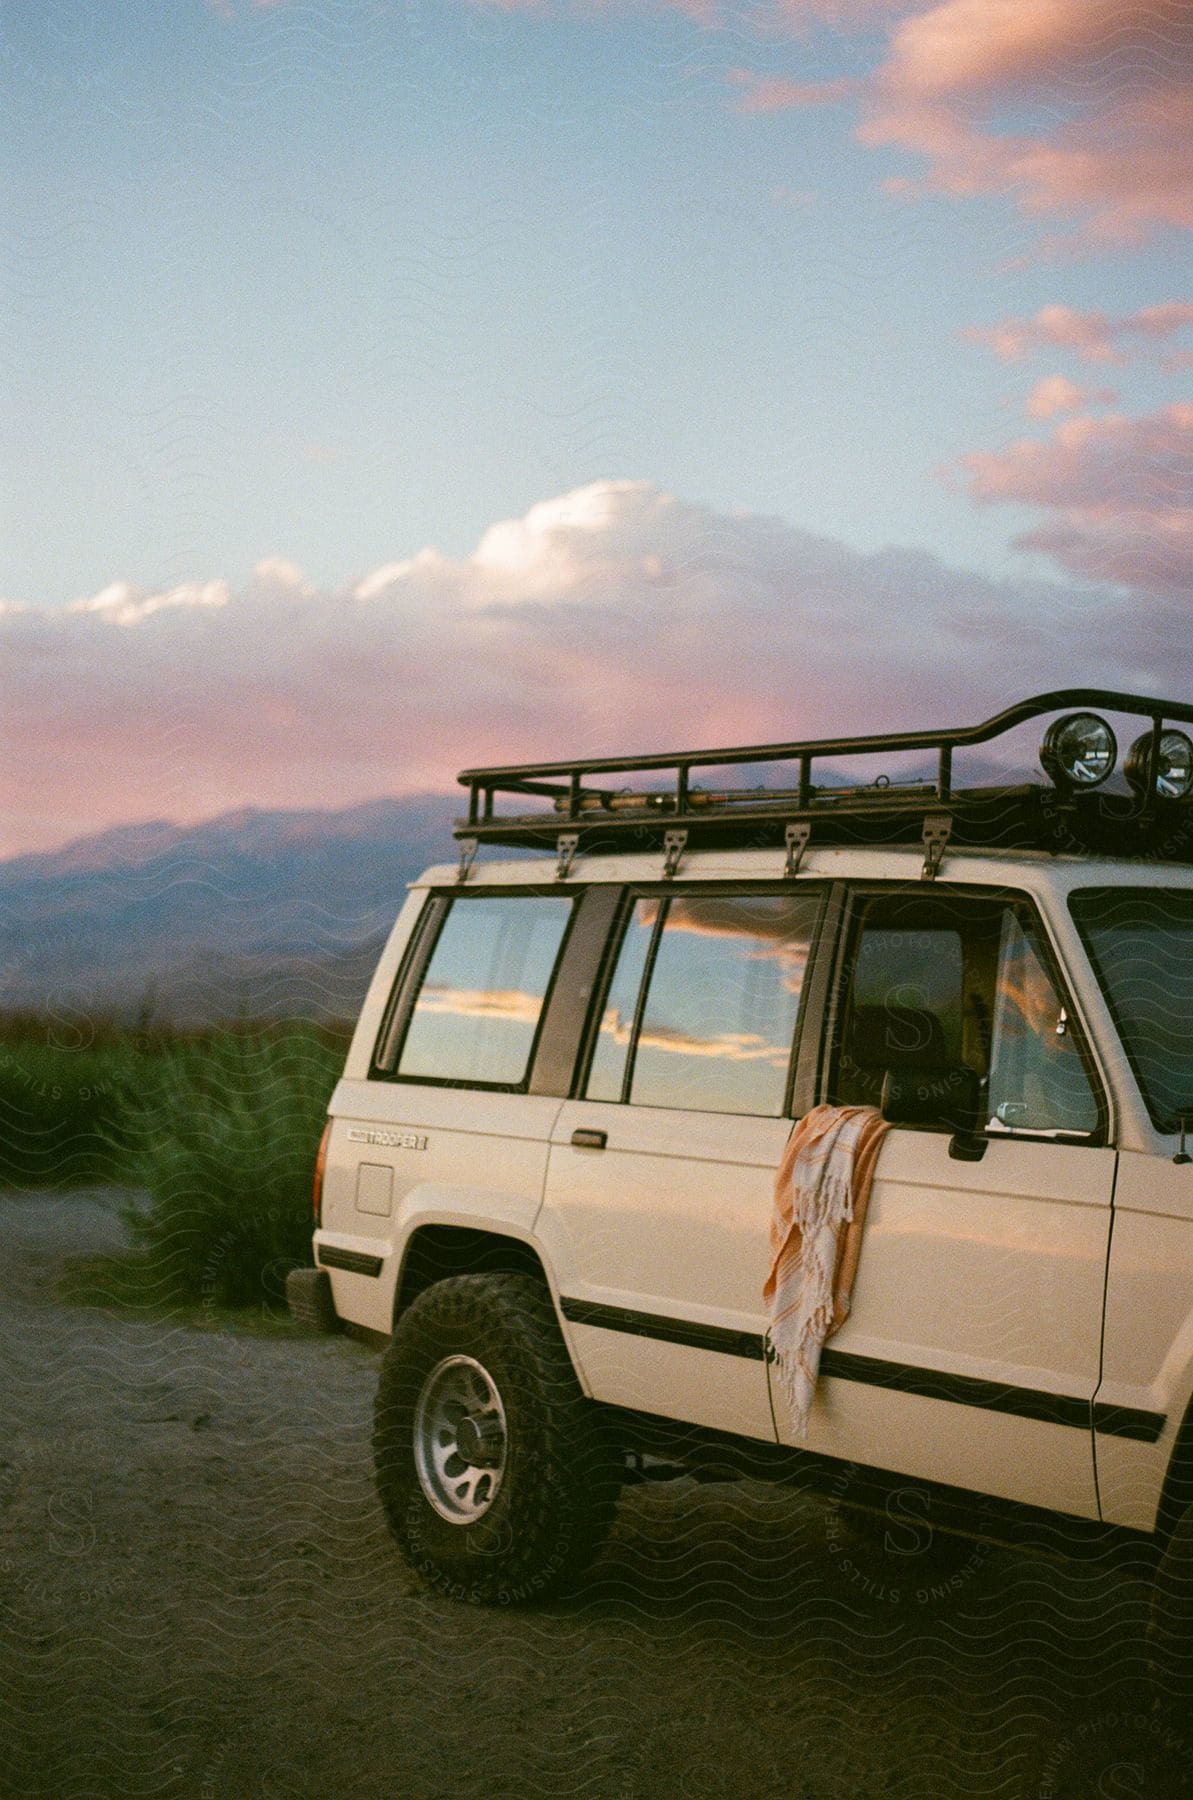 White jeep parked outdoors with the front window down a shirt hanging over it and mountains in the distance